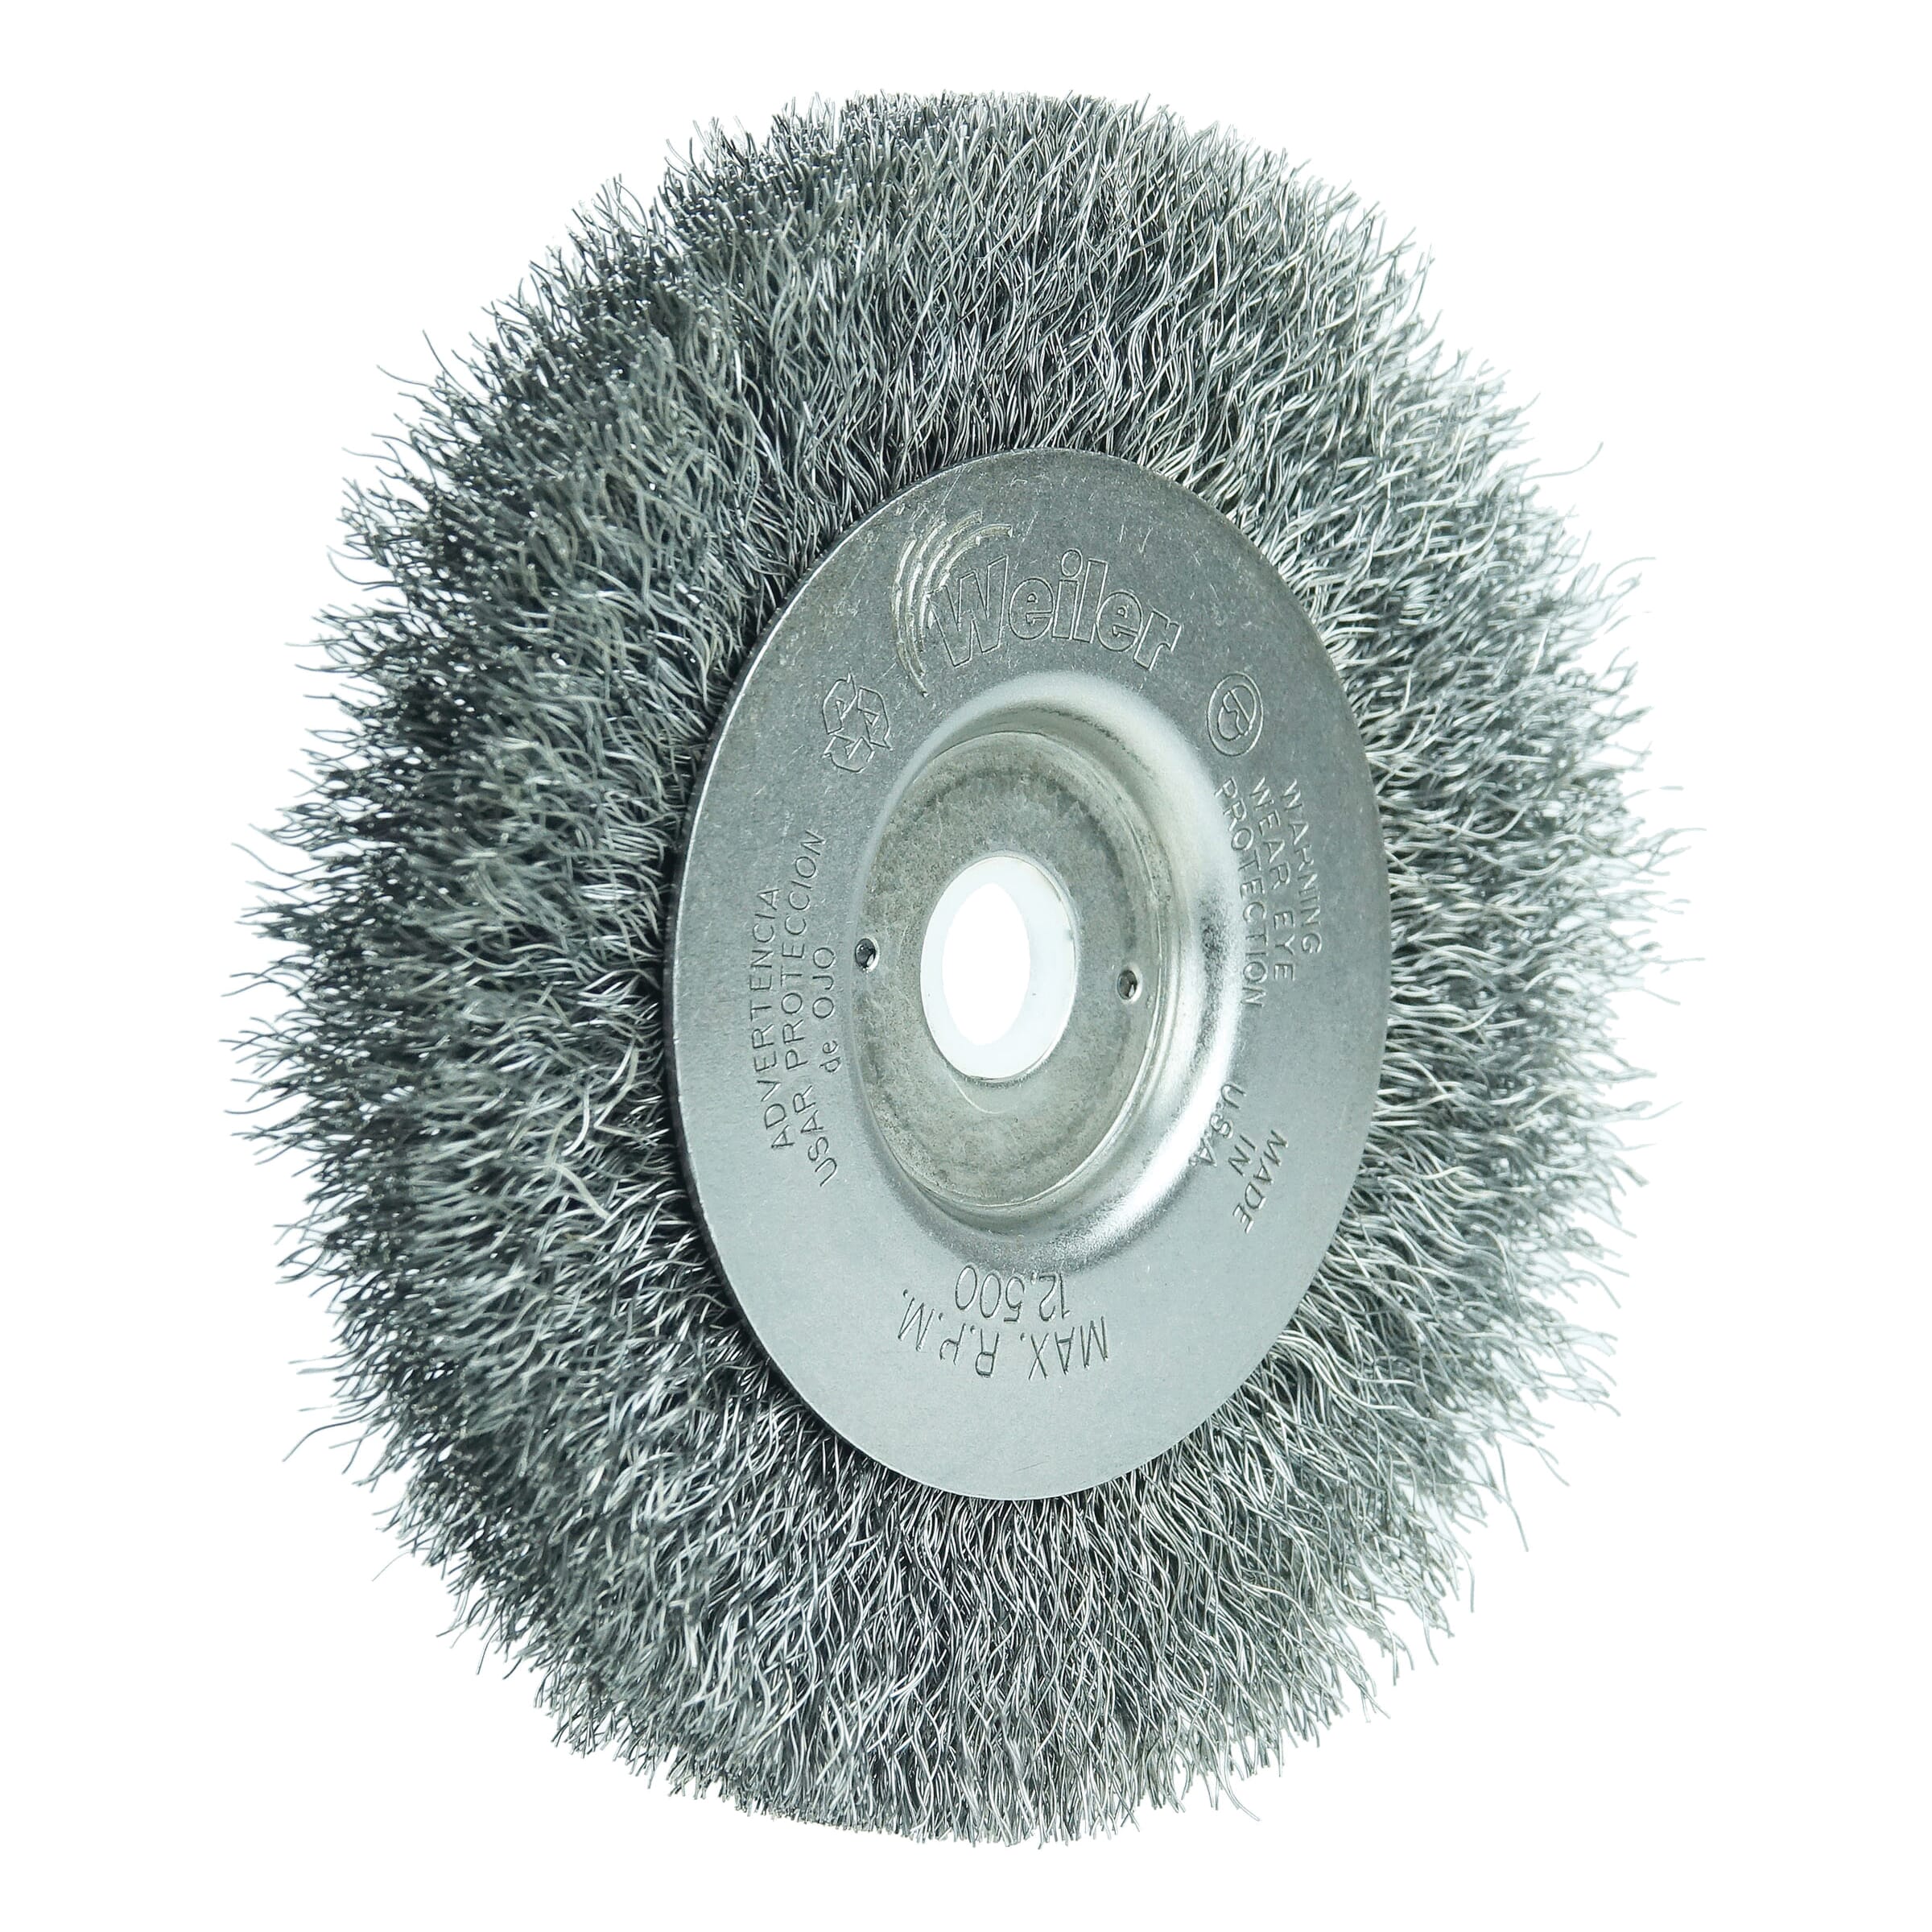 Weiler® 00114 Narrow Face Wheel Brush, 4 in Dia Brush, 1/2 in W Face, 0.008 in Dia Crimped Filament/Wire, 1/2 to 3/8 in Arbor Hole